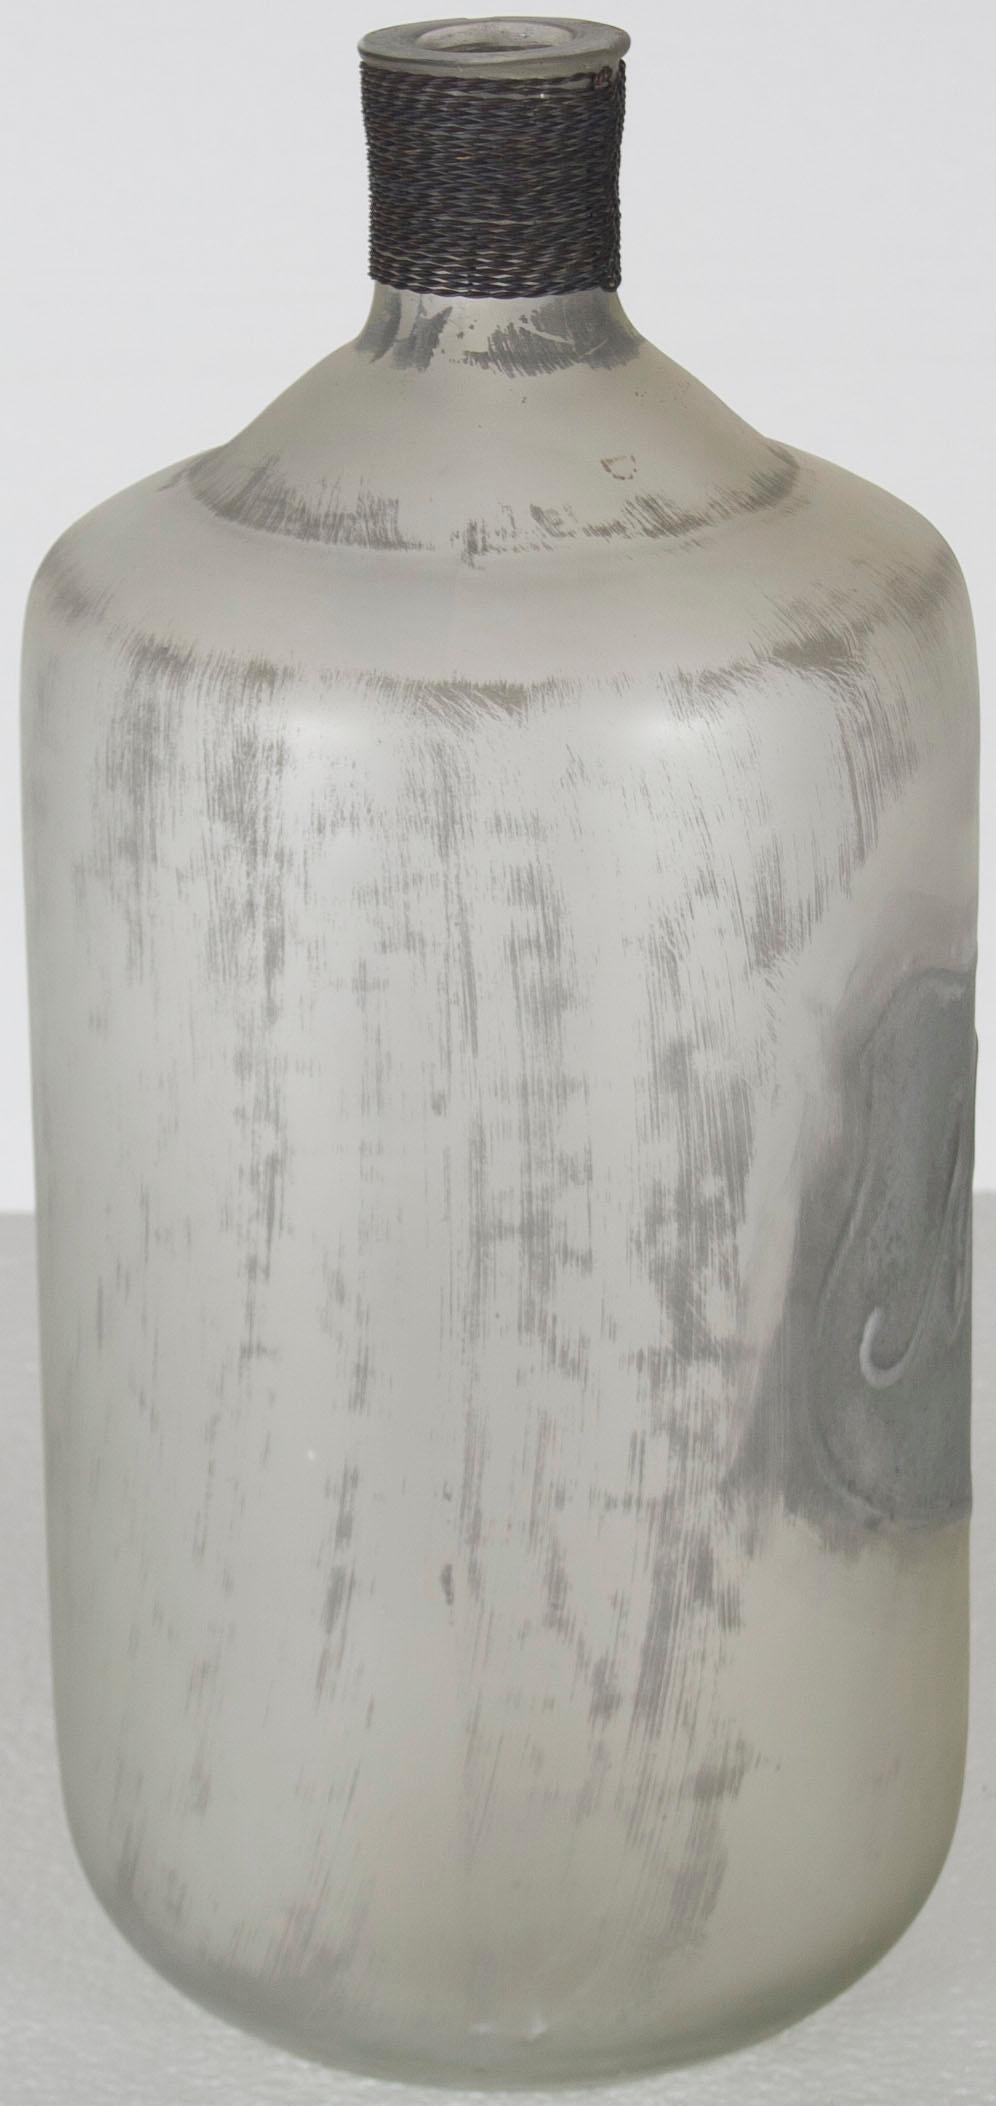 This large frosted glass jug is a new item, made like wine jugs of old. The glass is a distressed, frosted white with grey. The neck has been wrapped in a metal wire cord for a subtle contrast. A shield emblem with “No 3? has been embossed on the